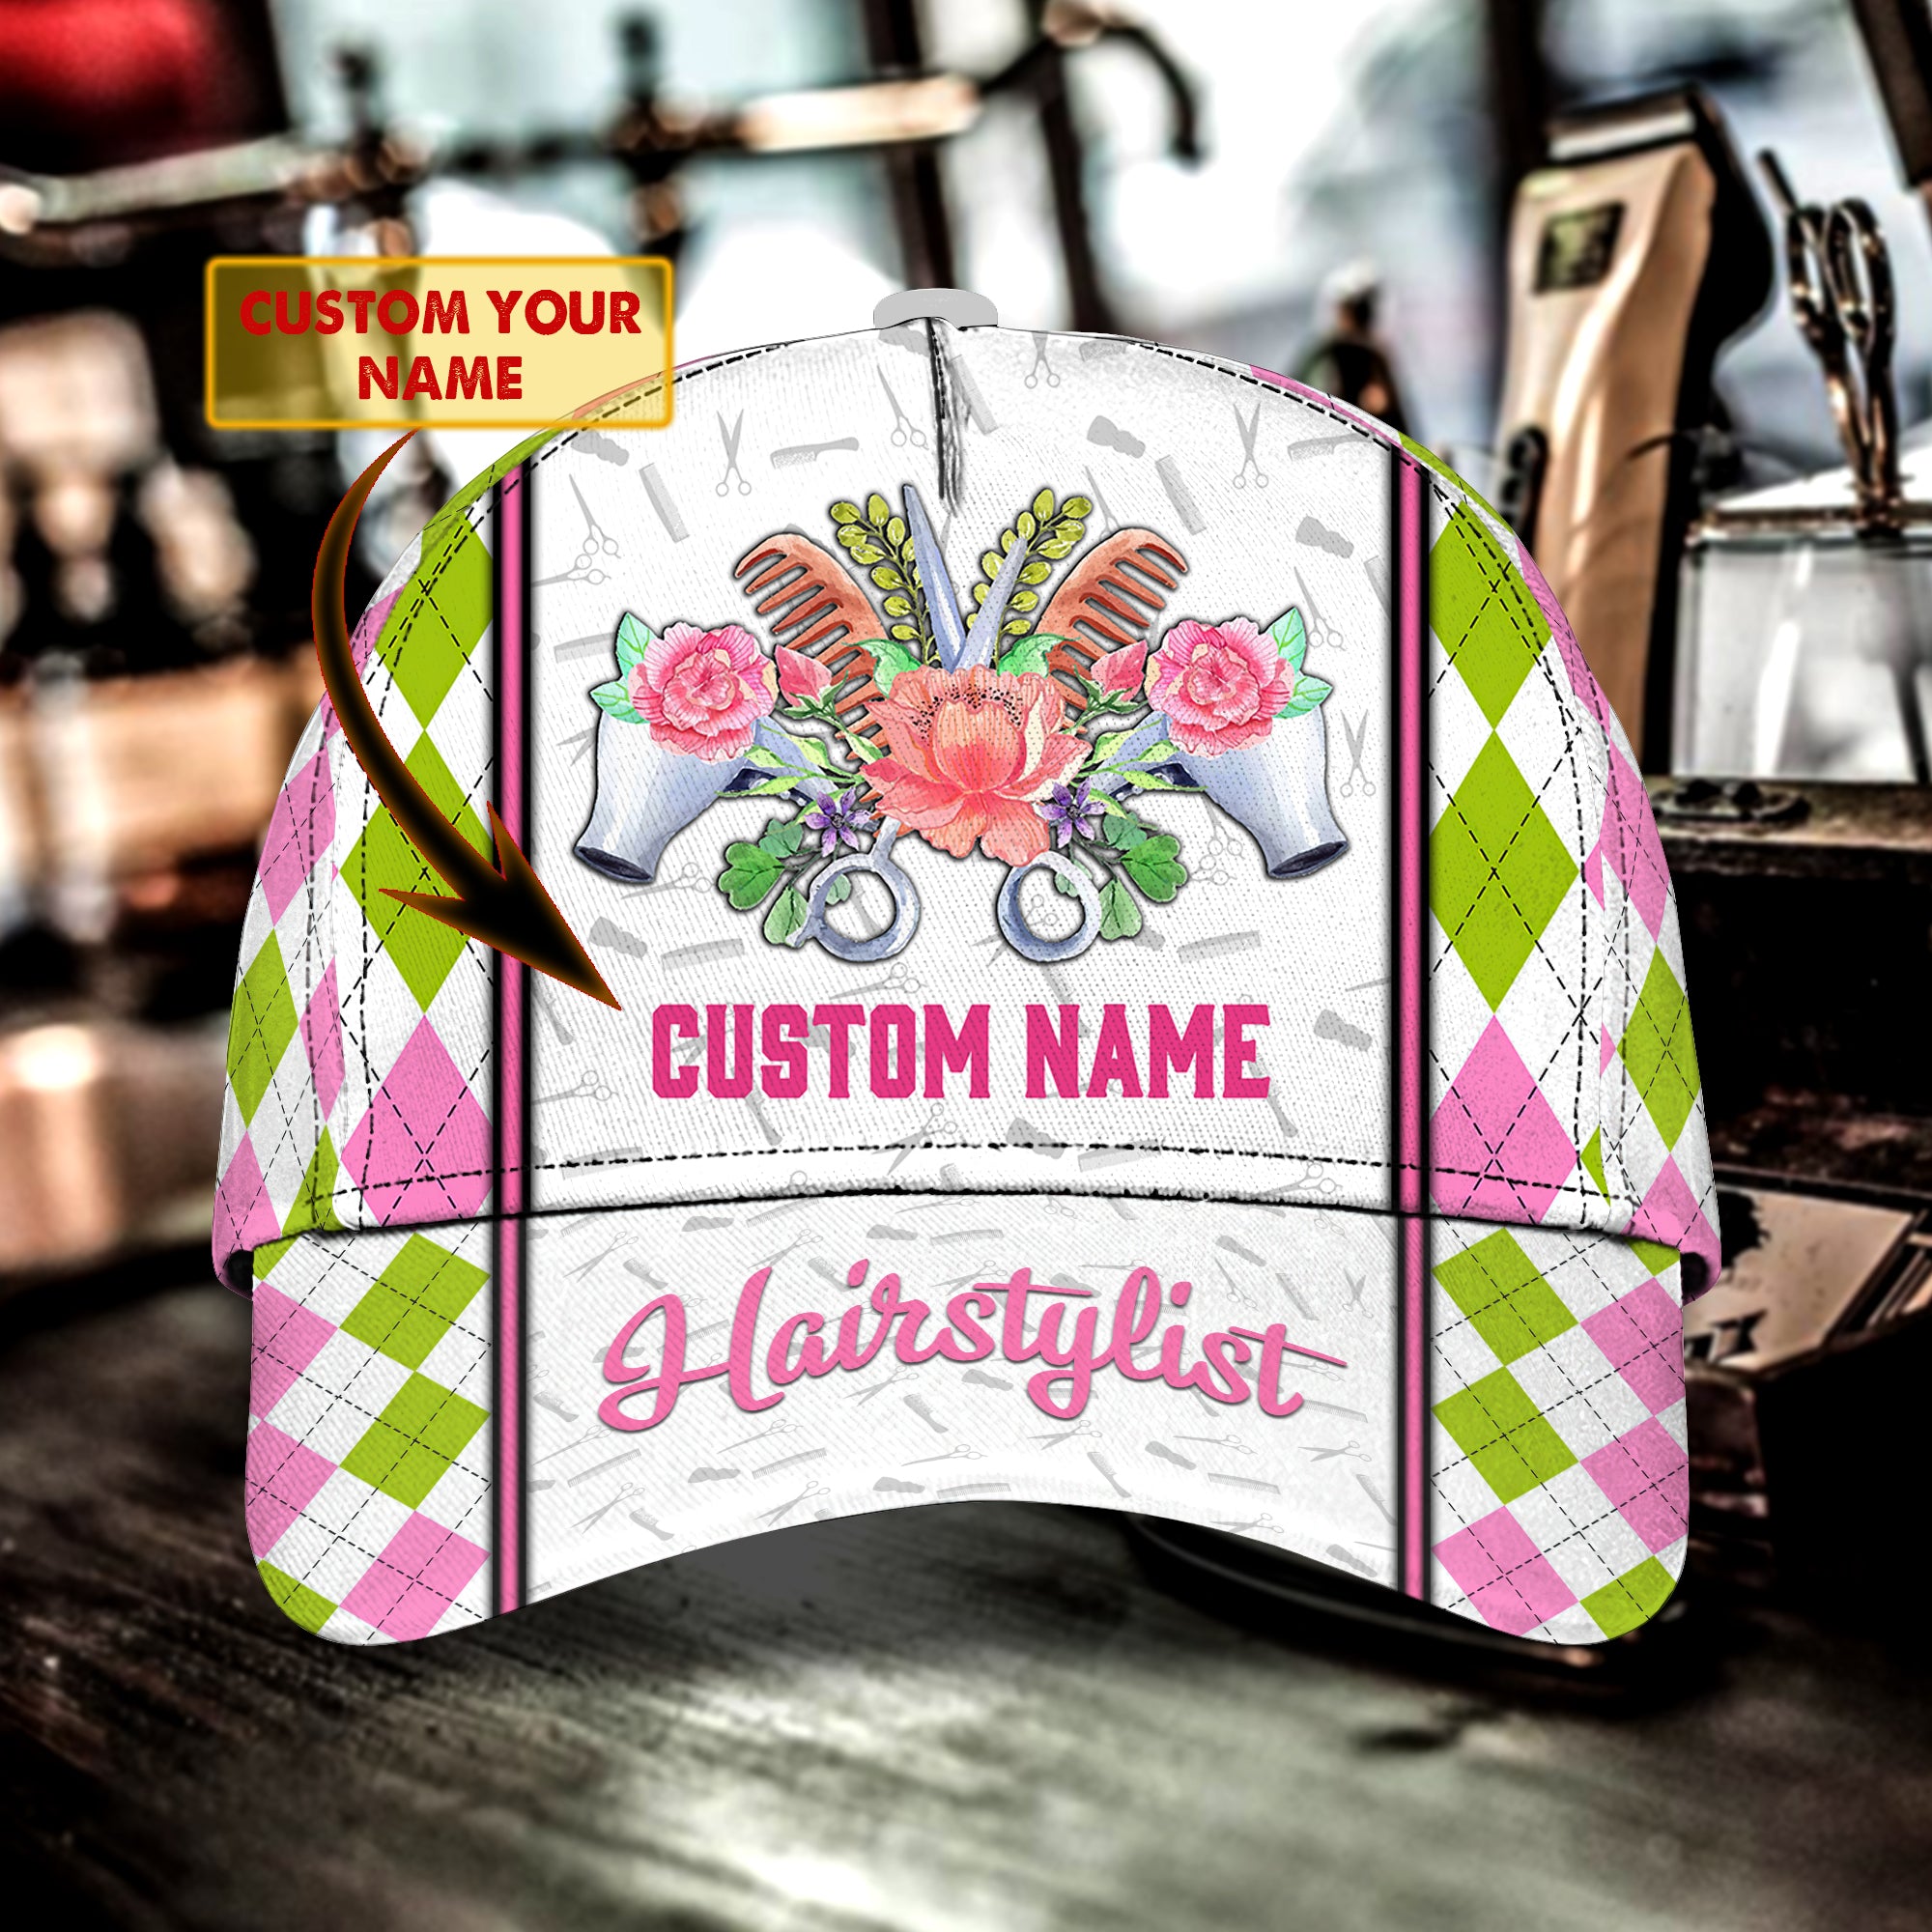 HAIRSTYLIST - Personalized Name Cap01 - RINC98